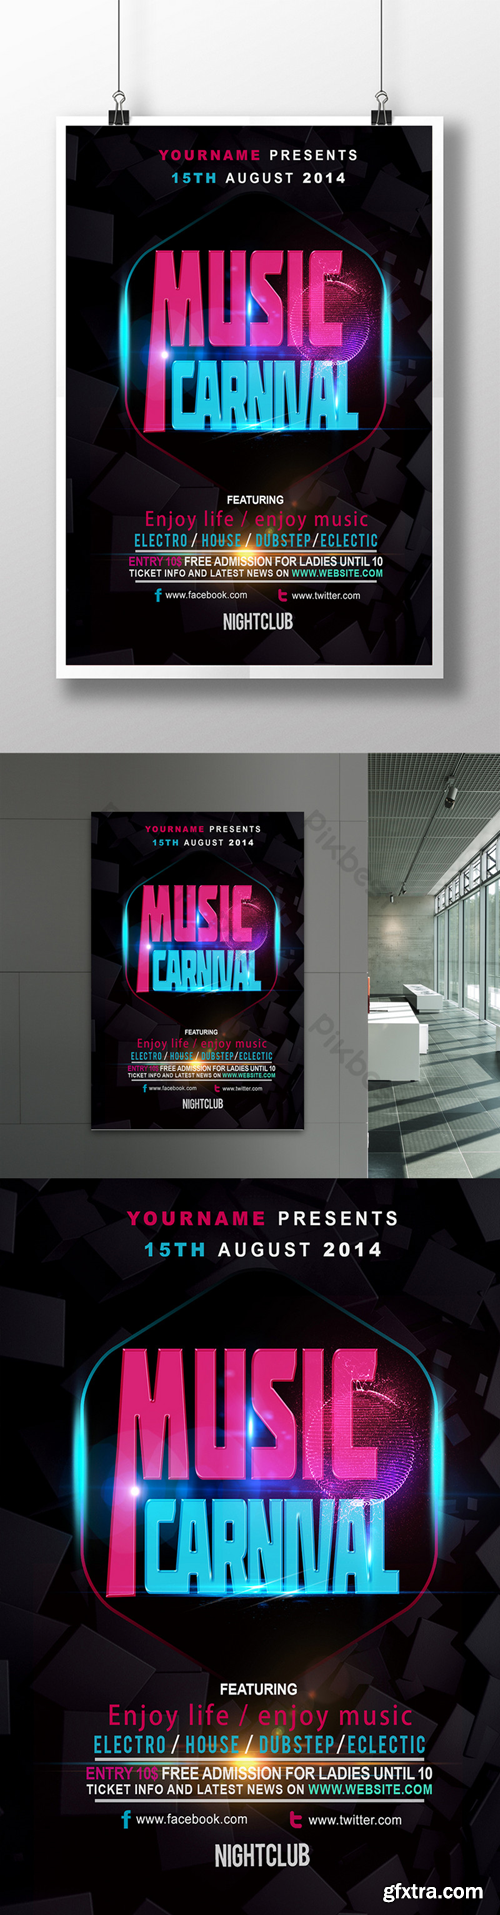 Cool music carnival festival promotional poster design Template PSD